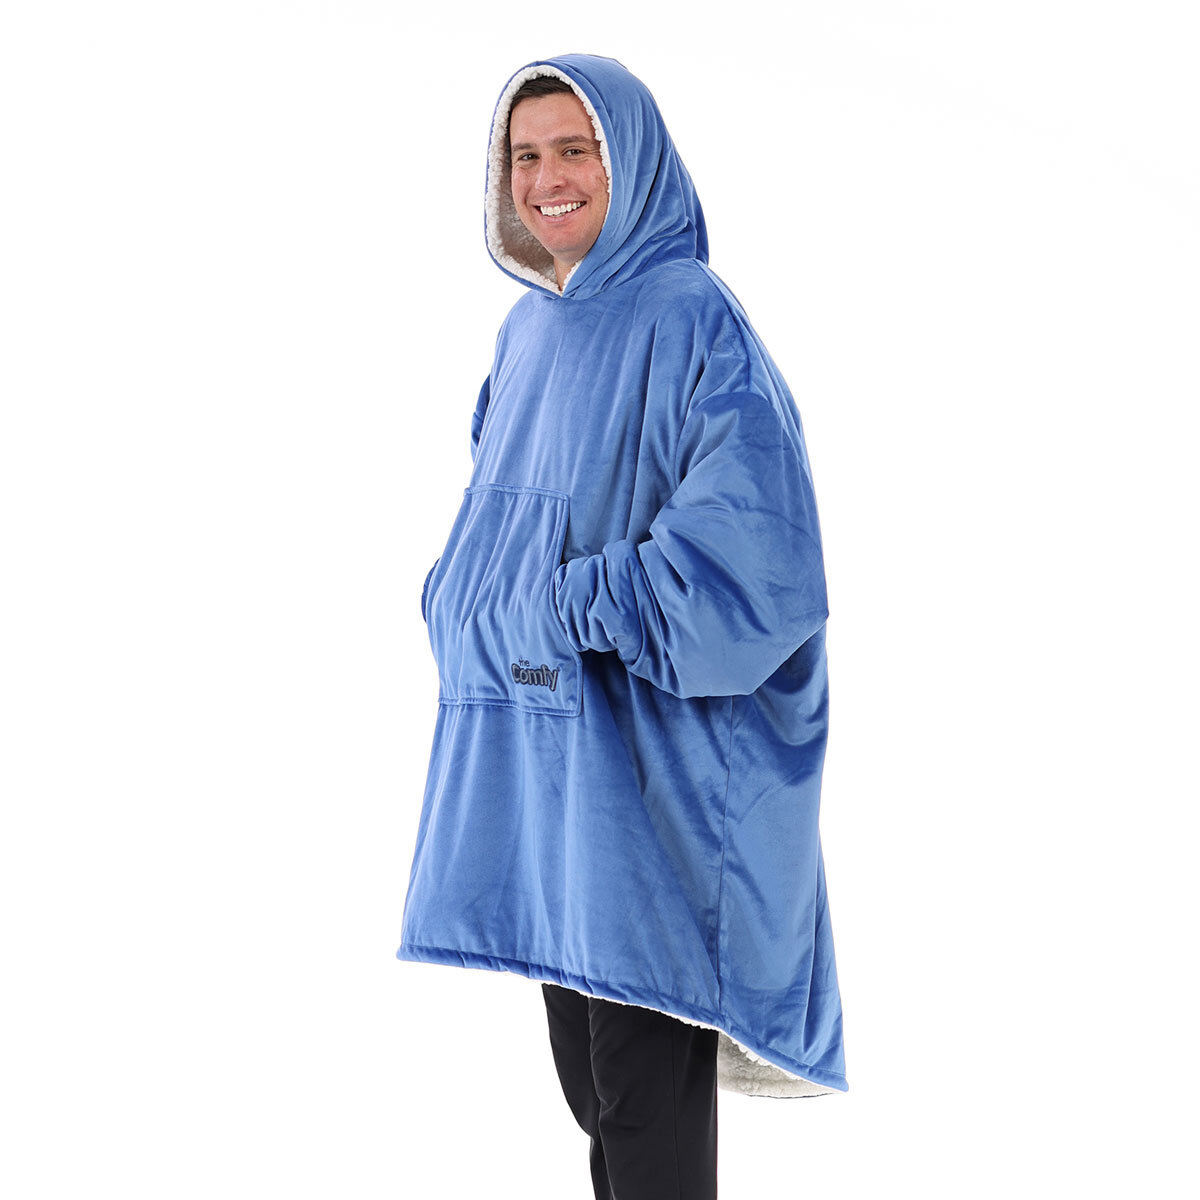 The Comfy Original Wearable Blanket in Blue